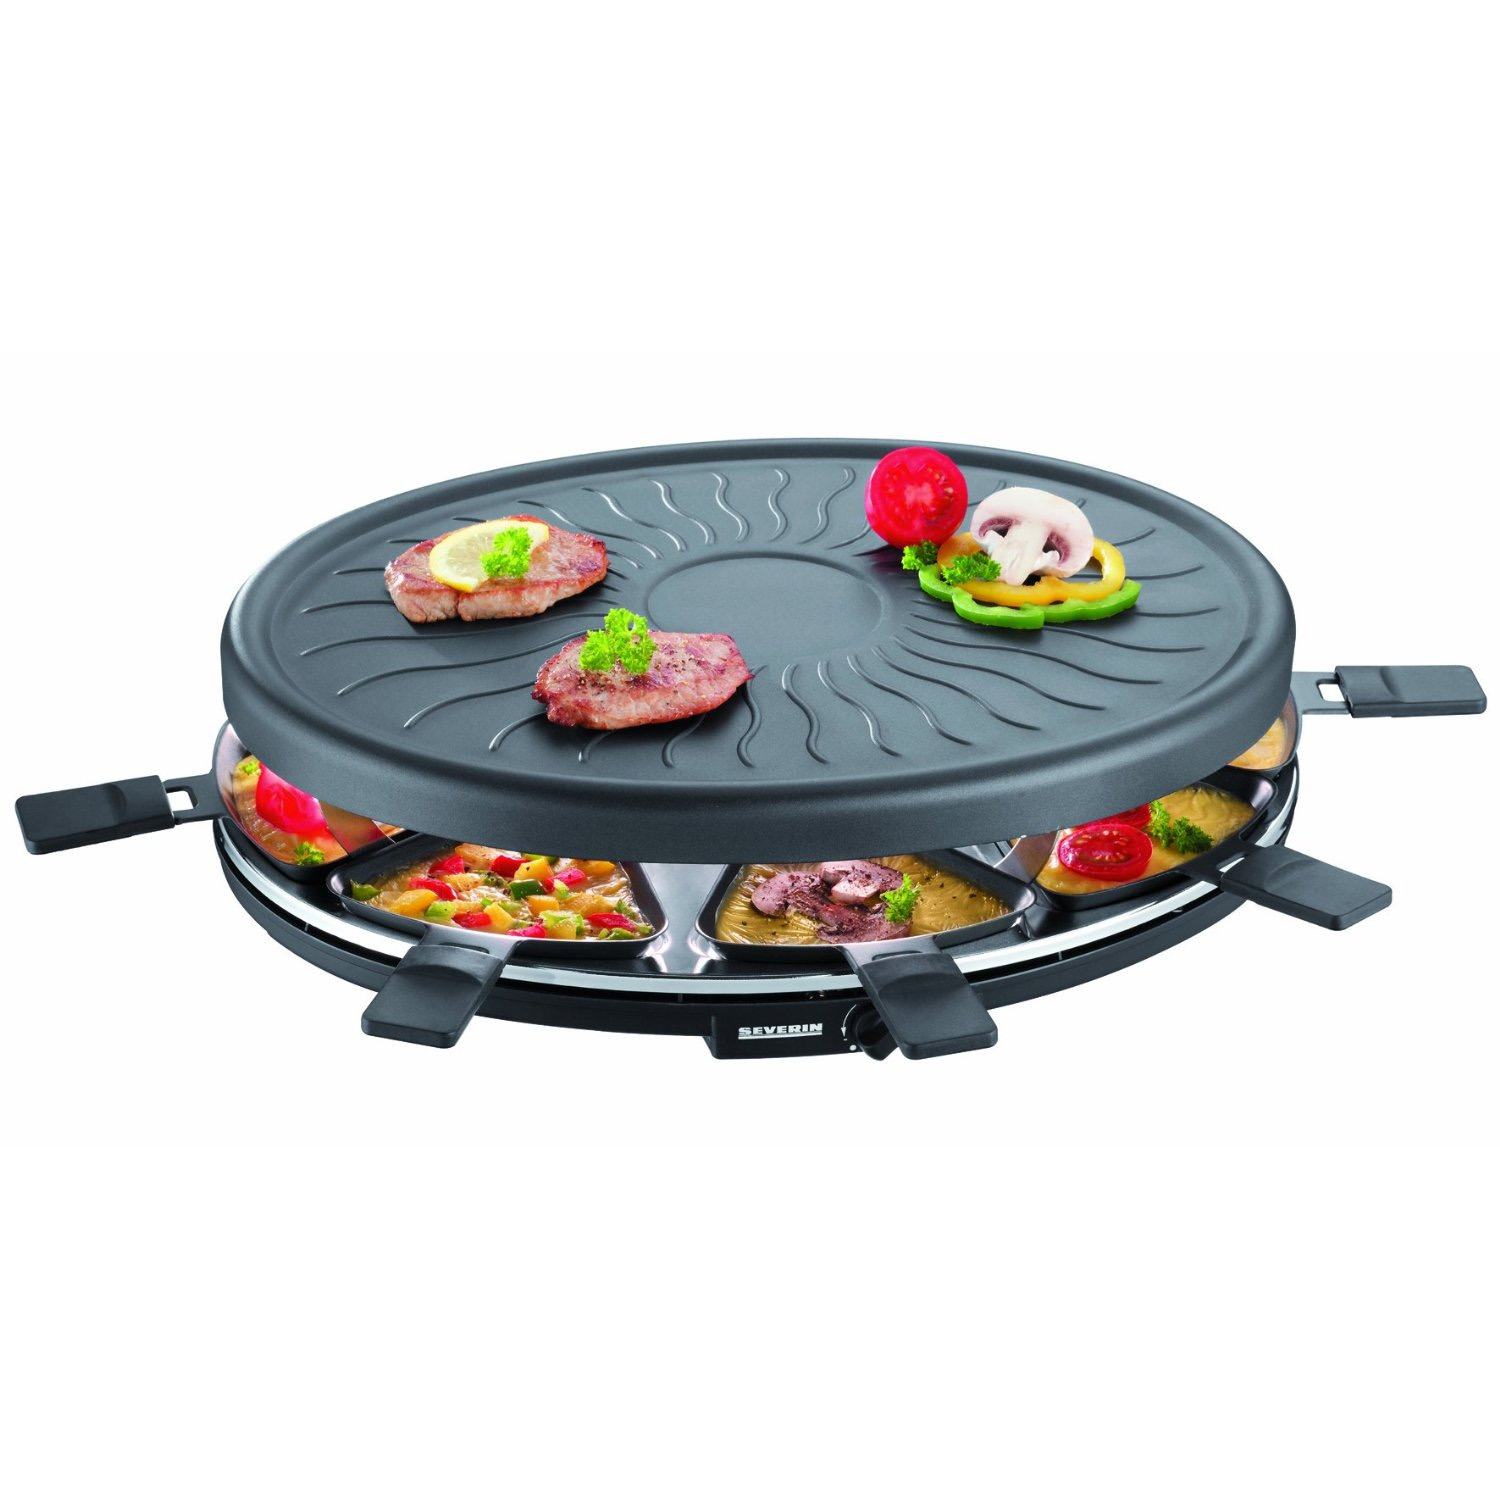 Severin RG 2681 Raclette-Partygrill